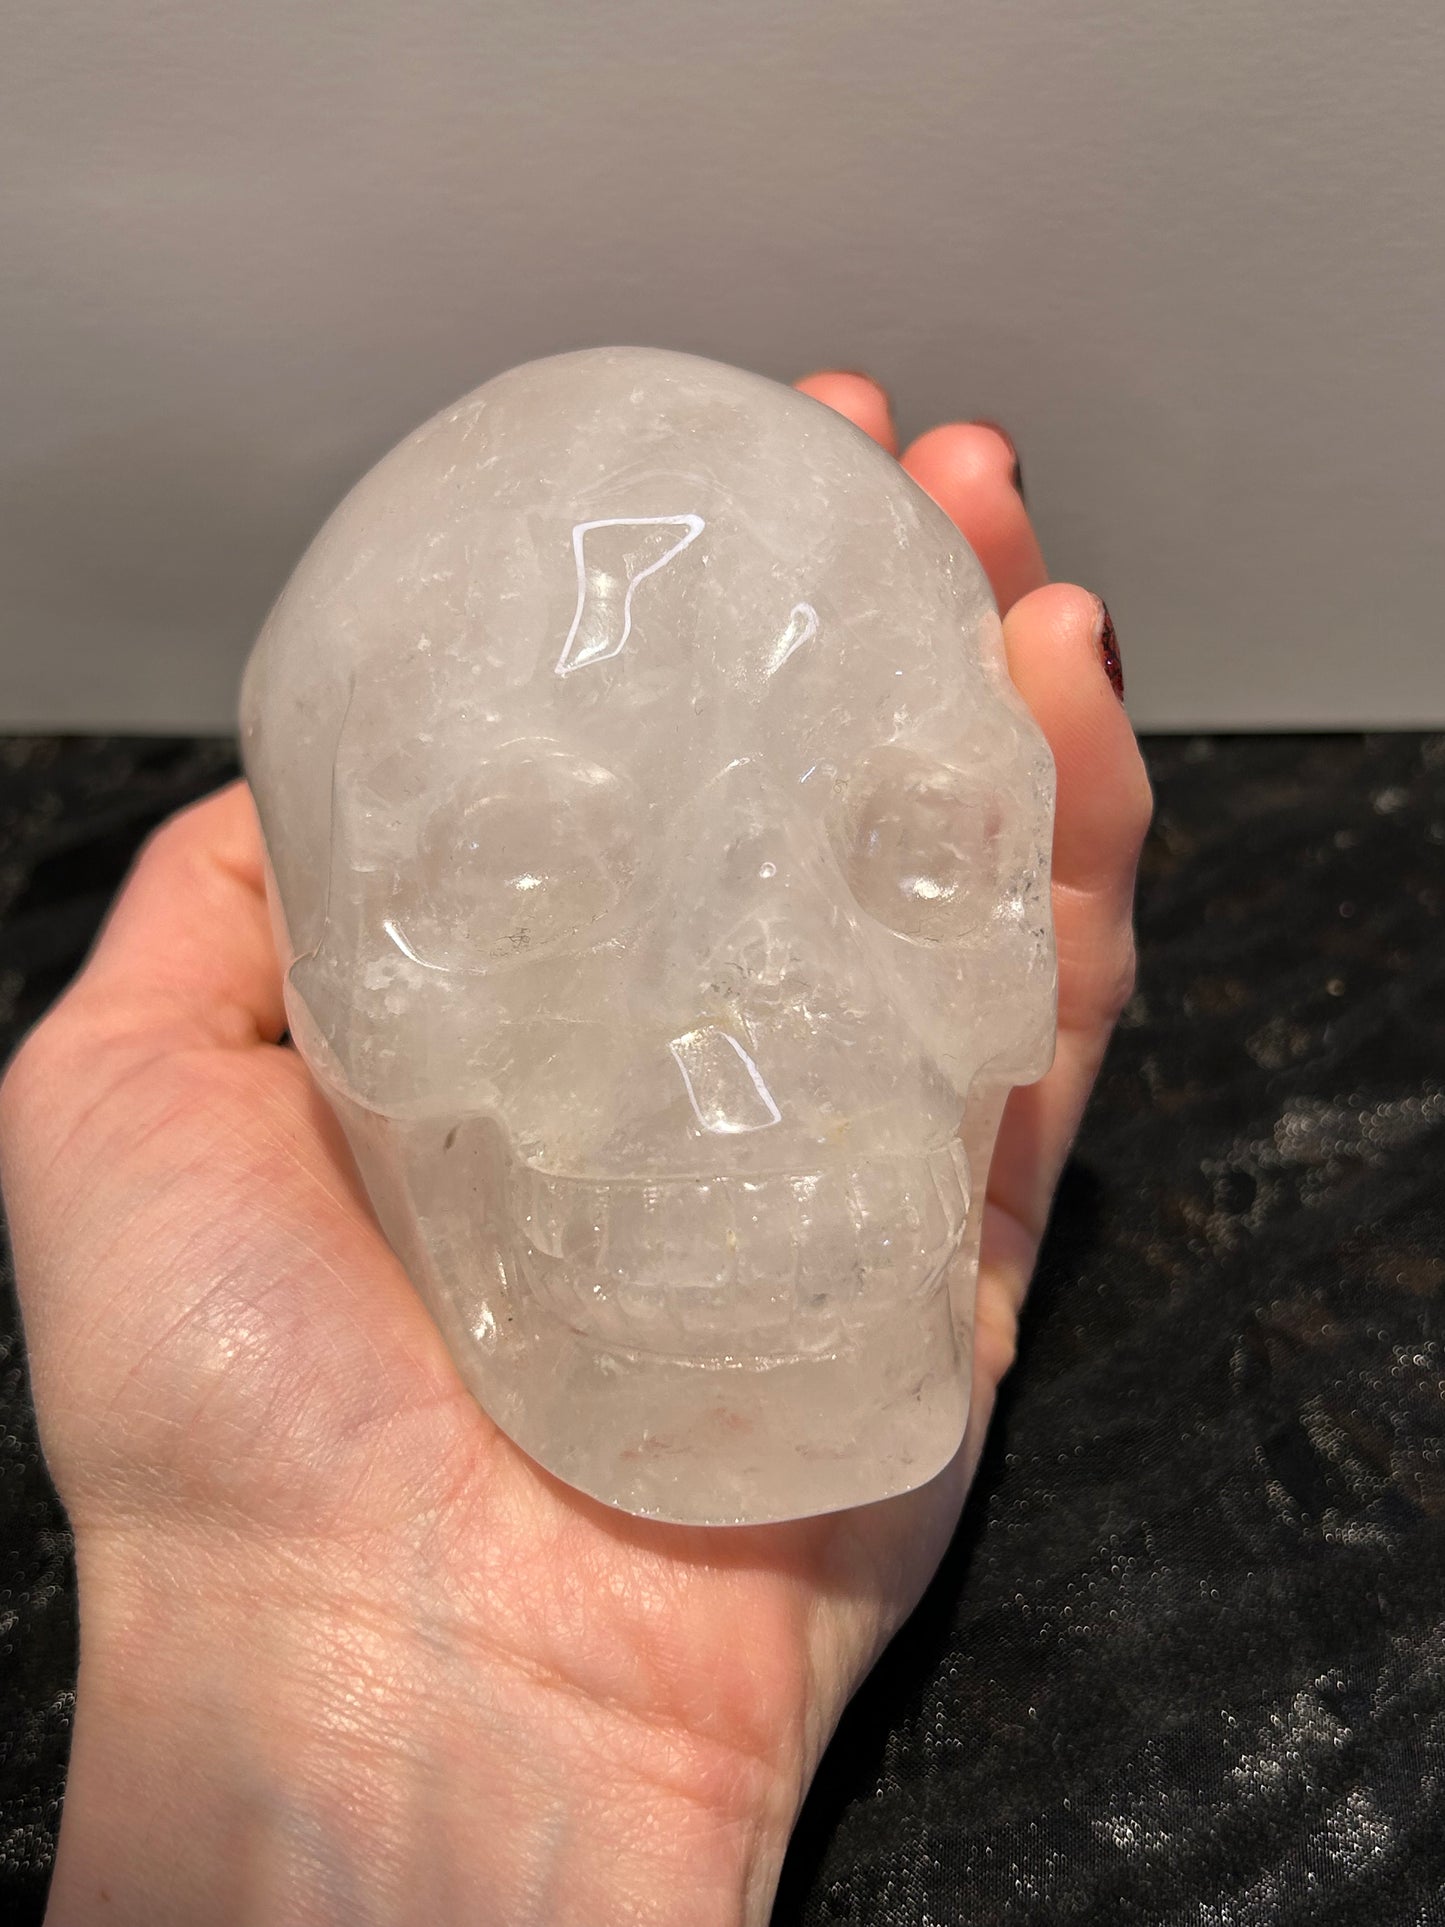 Clear Quartz Skull Carving Large Statment Piece